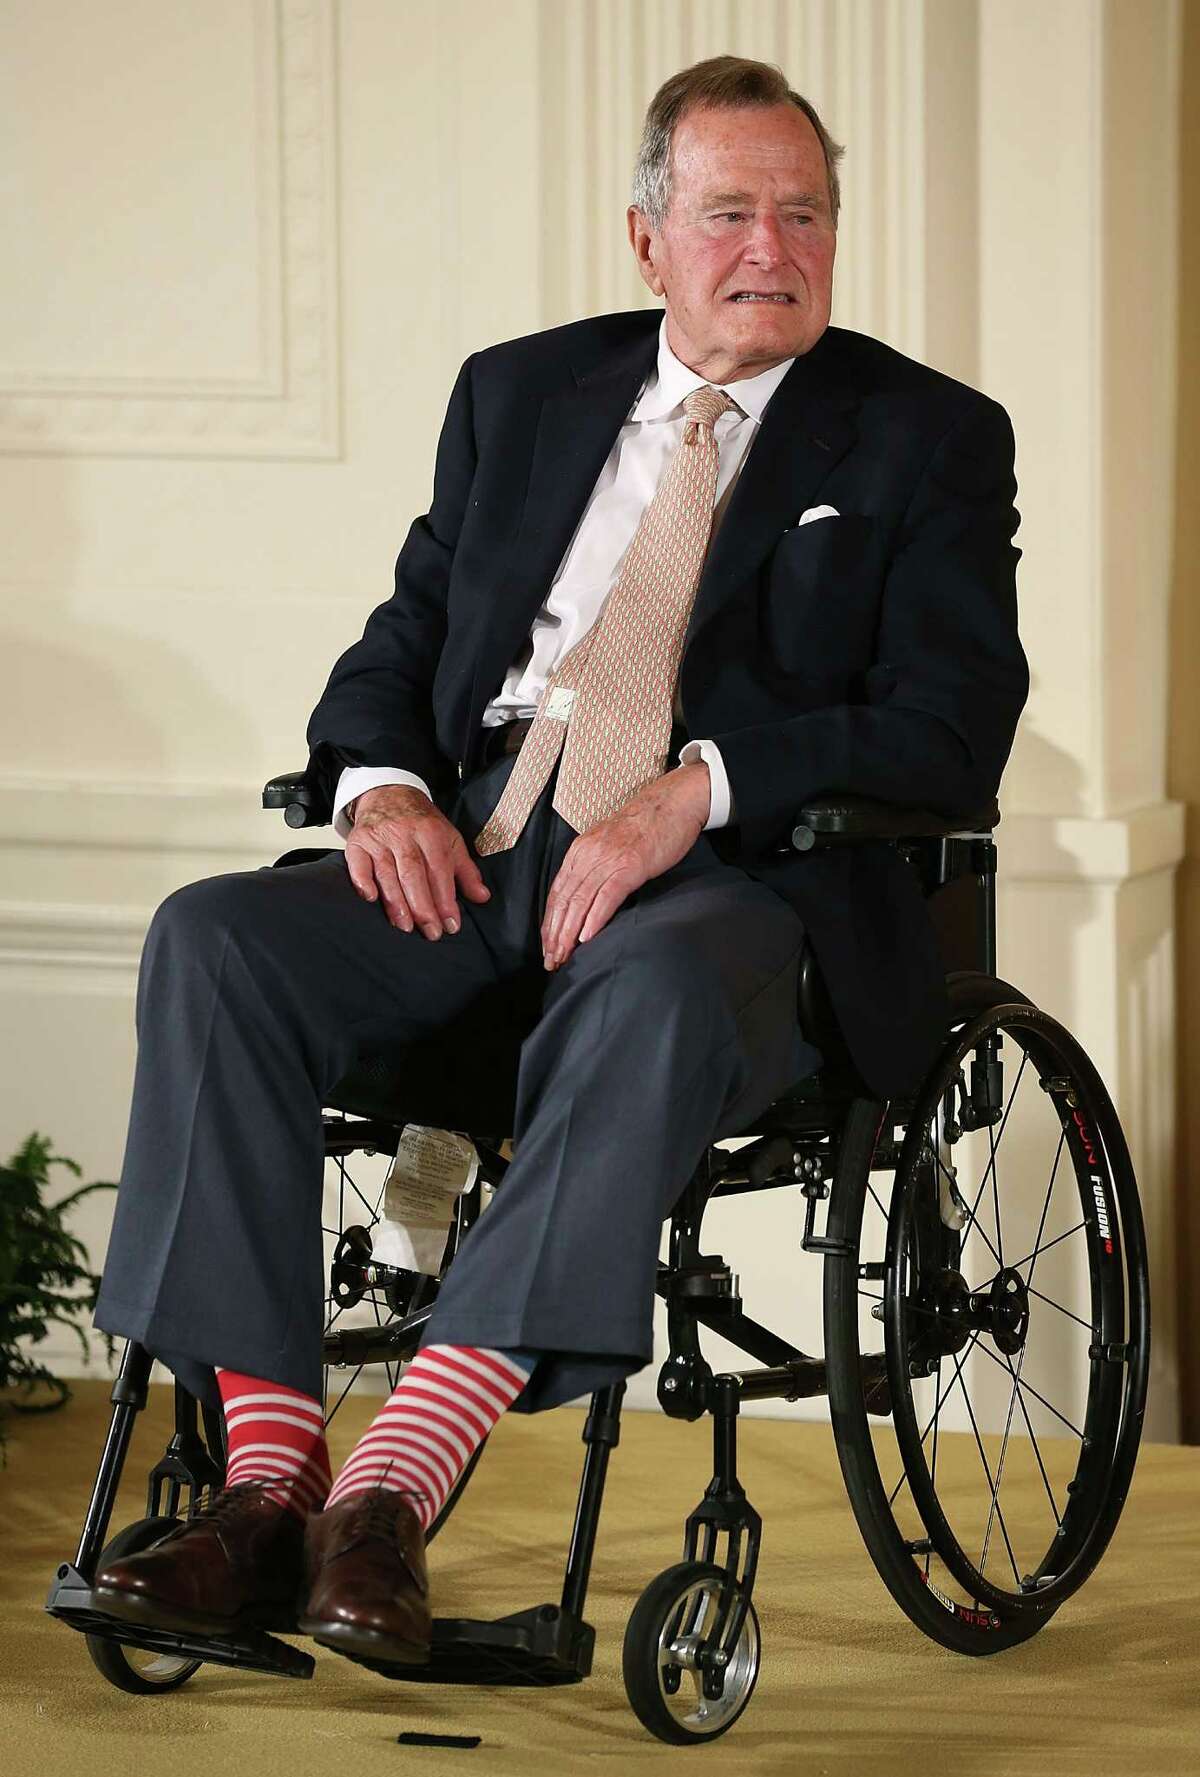 FILE - DECEMBER 24, 2014: It was reported that former U.S. President George H.W. Bush was hospitalized after experiencing a shortness of breath December 24, 2014 in Houston, Texas. WASHINGTON, DC - JULY 15: Former President George H. W. Bush wears red stripped socks as he sits in a wheelchair during an event in the East Room at the White House, July 15, 2013 in Washington, DC. Bush joined President Obama in hosting the event to honor the 5,000th Daily Point of Light Award winner. (Photo by Mark Wilson/Getty Images)